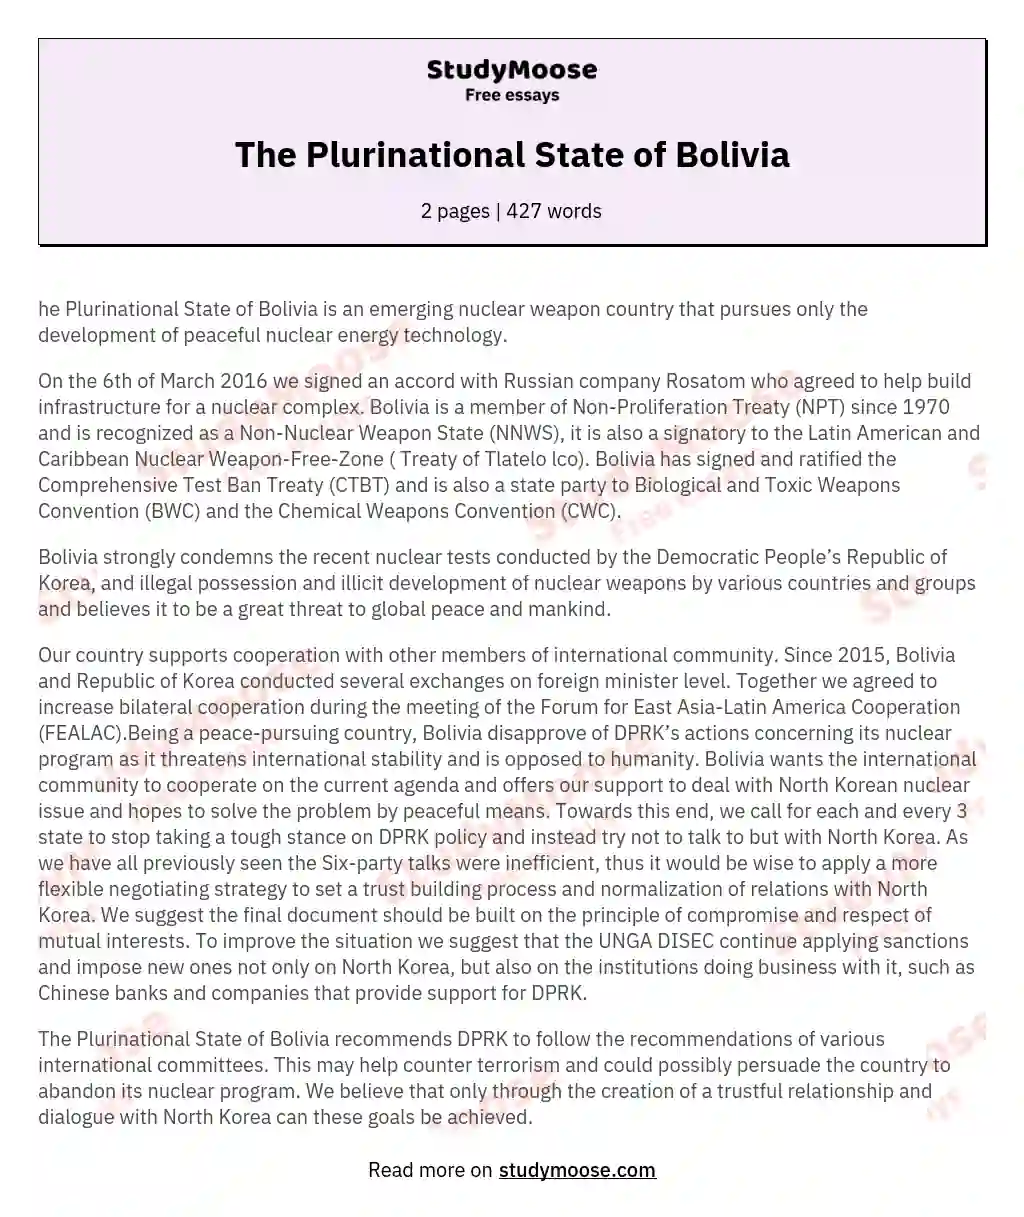 The Plurinational State of Bolivia essay